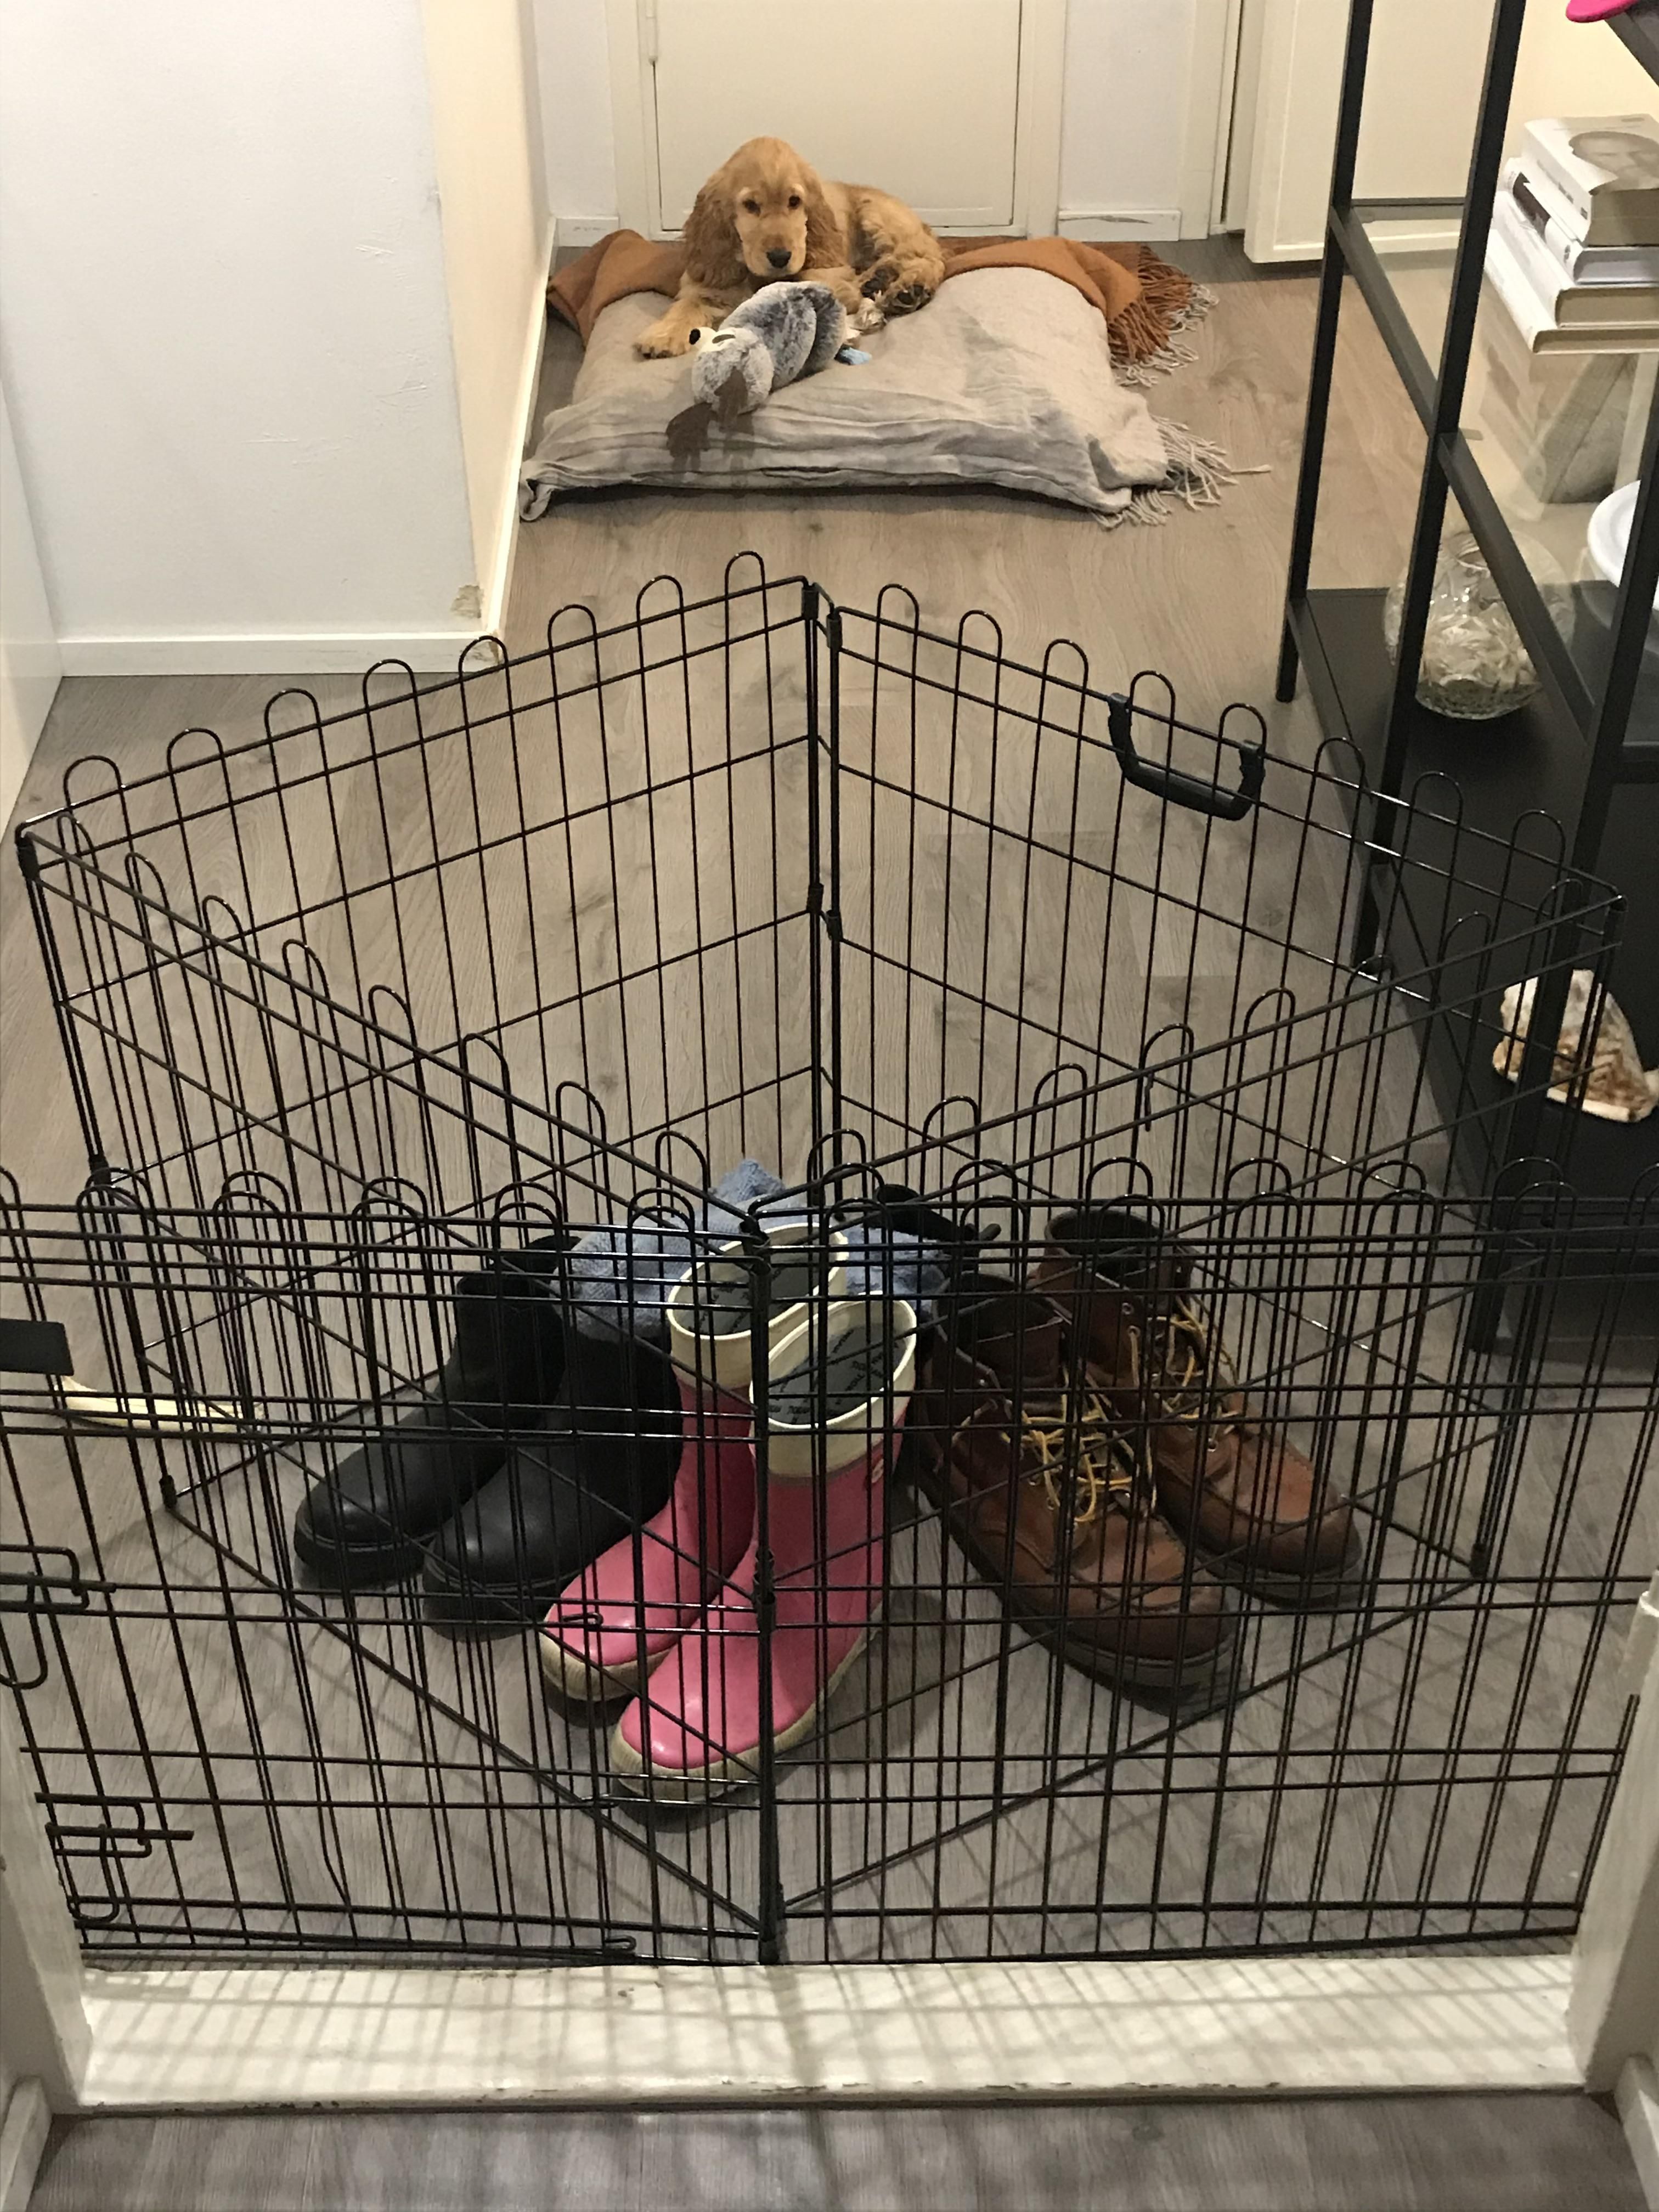 How the dog cage ended up being used.